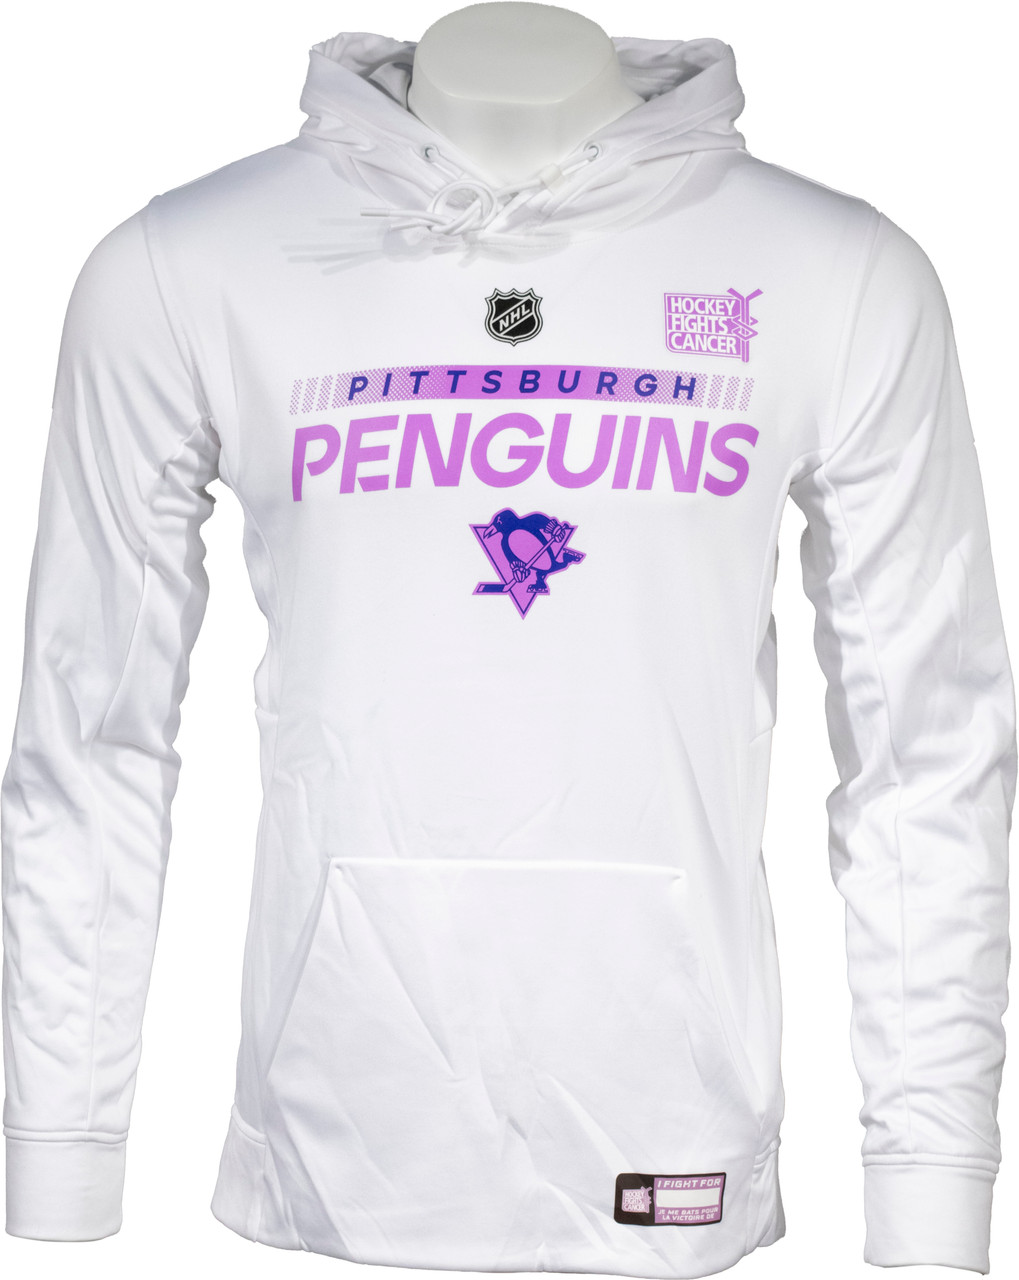 Pittsburgh Penguins Hockey Fights Cancer Jersey